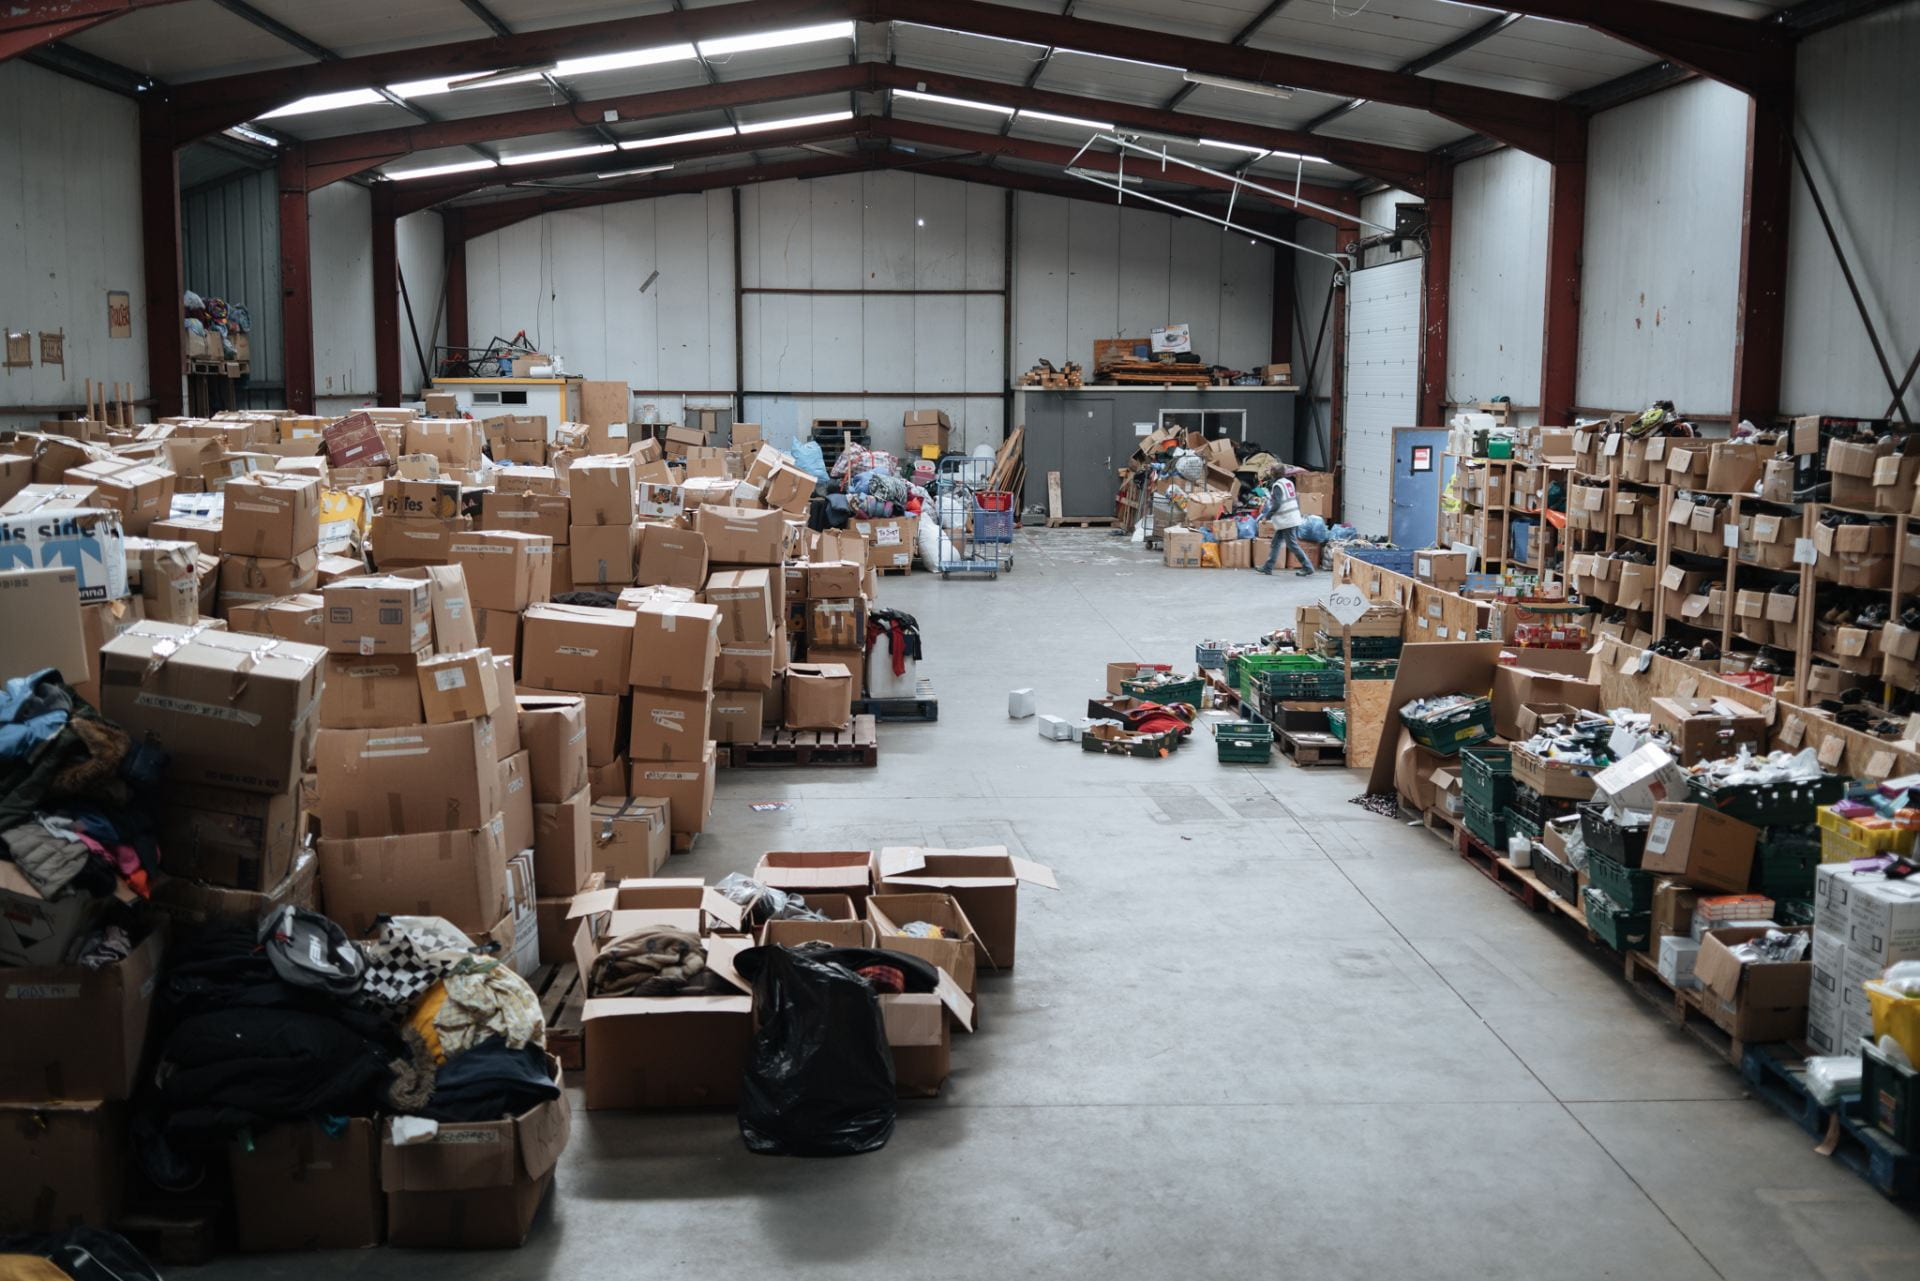 Warehouse interior, stacked cardboard boxes containing a variety of shoes & clothing.